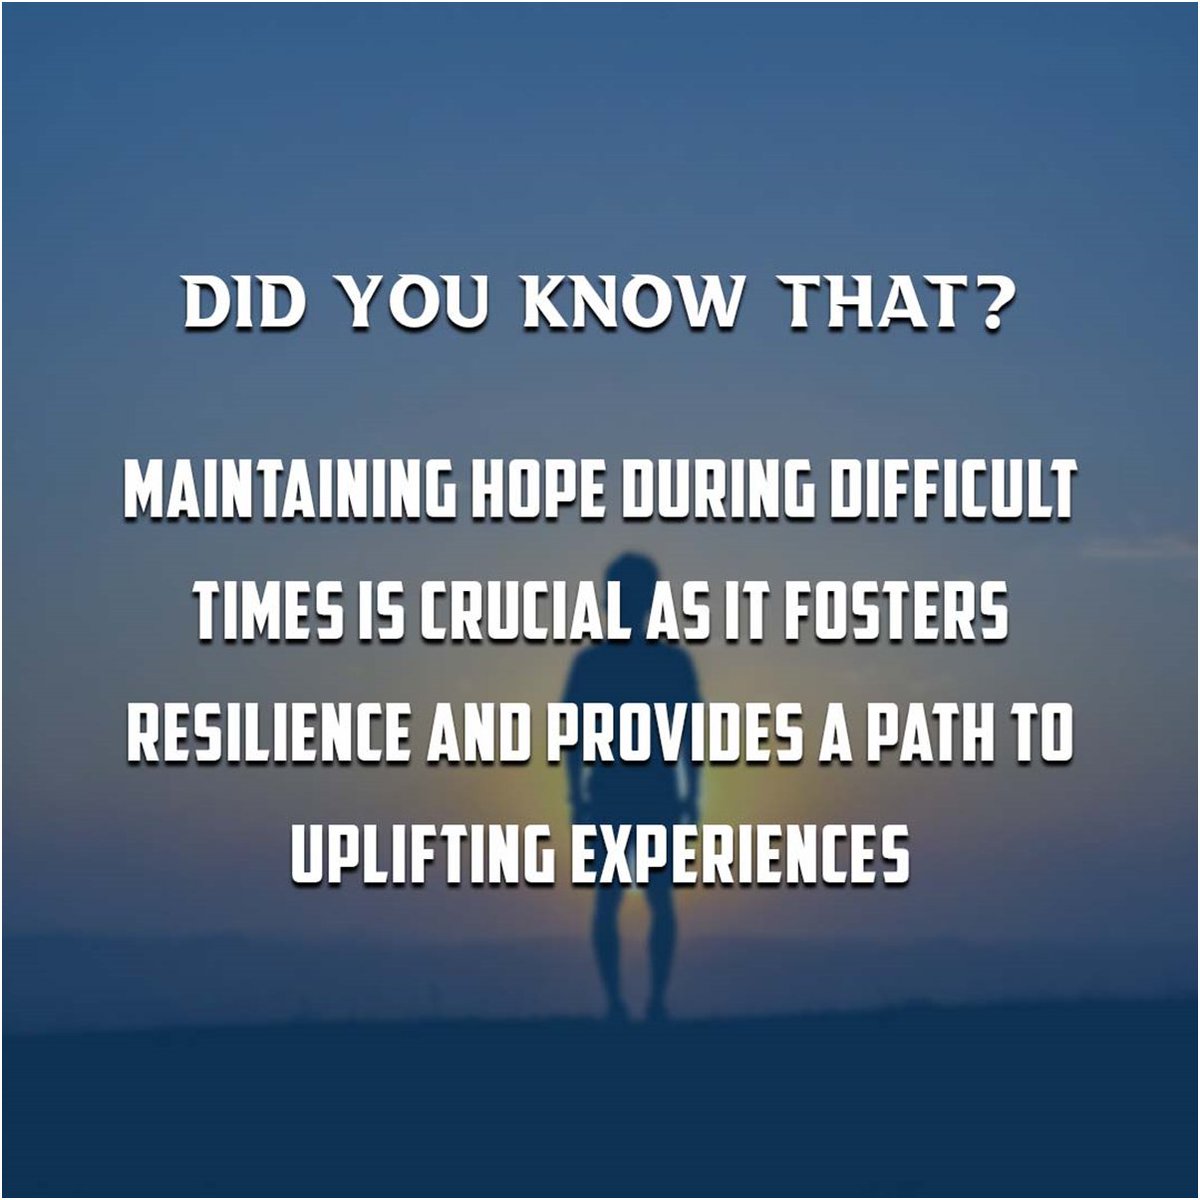 Did you know that?

Maintaining hope during difficult times is crucial as it fosters resilience and provides a path to uplifting experiences.

Order your book now!
amzn.eu/d/hWDjLvy

#SarhangMajid #RisingAbove #bestauthor #bestsellingauthor #bestsellingbooks #booklovers